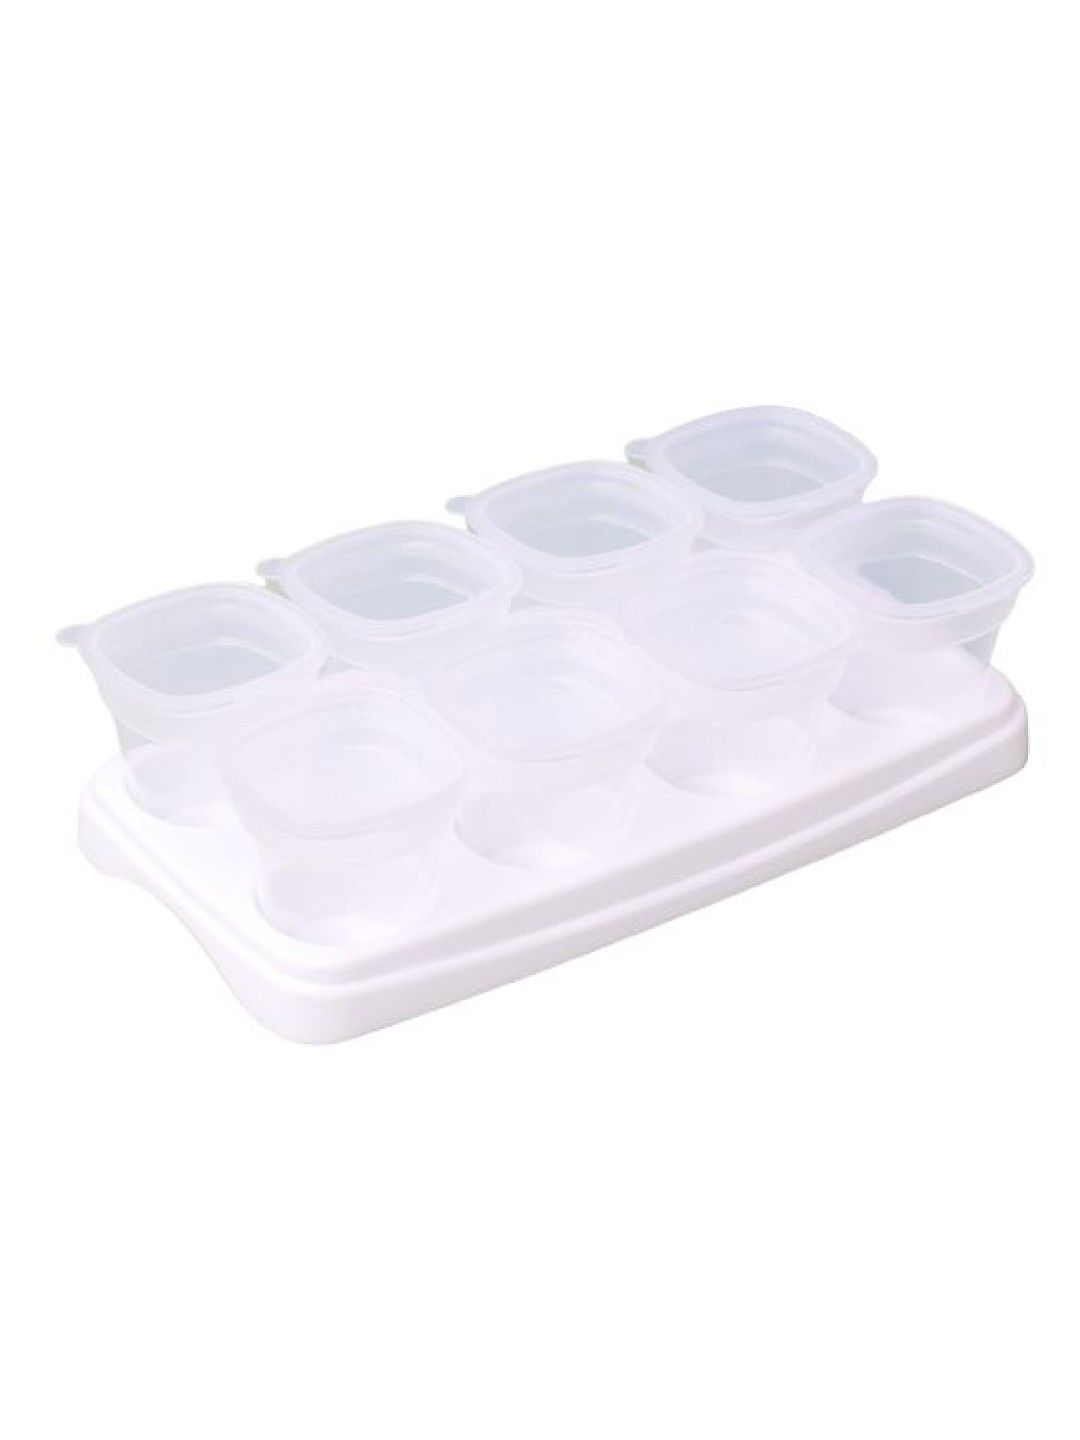 Fisher Price Feeding Dish 8 Baby Food Freezer Cubes with Tray